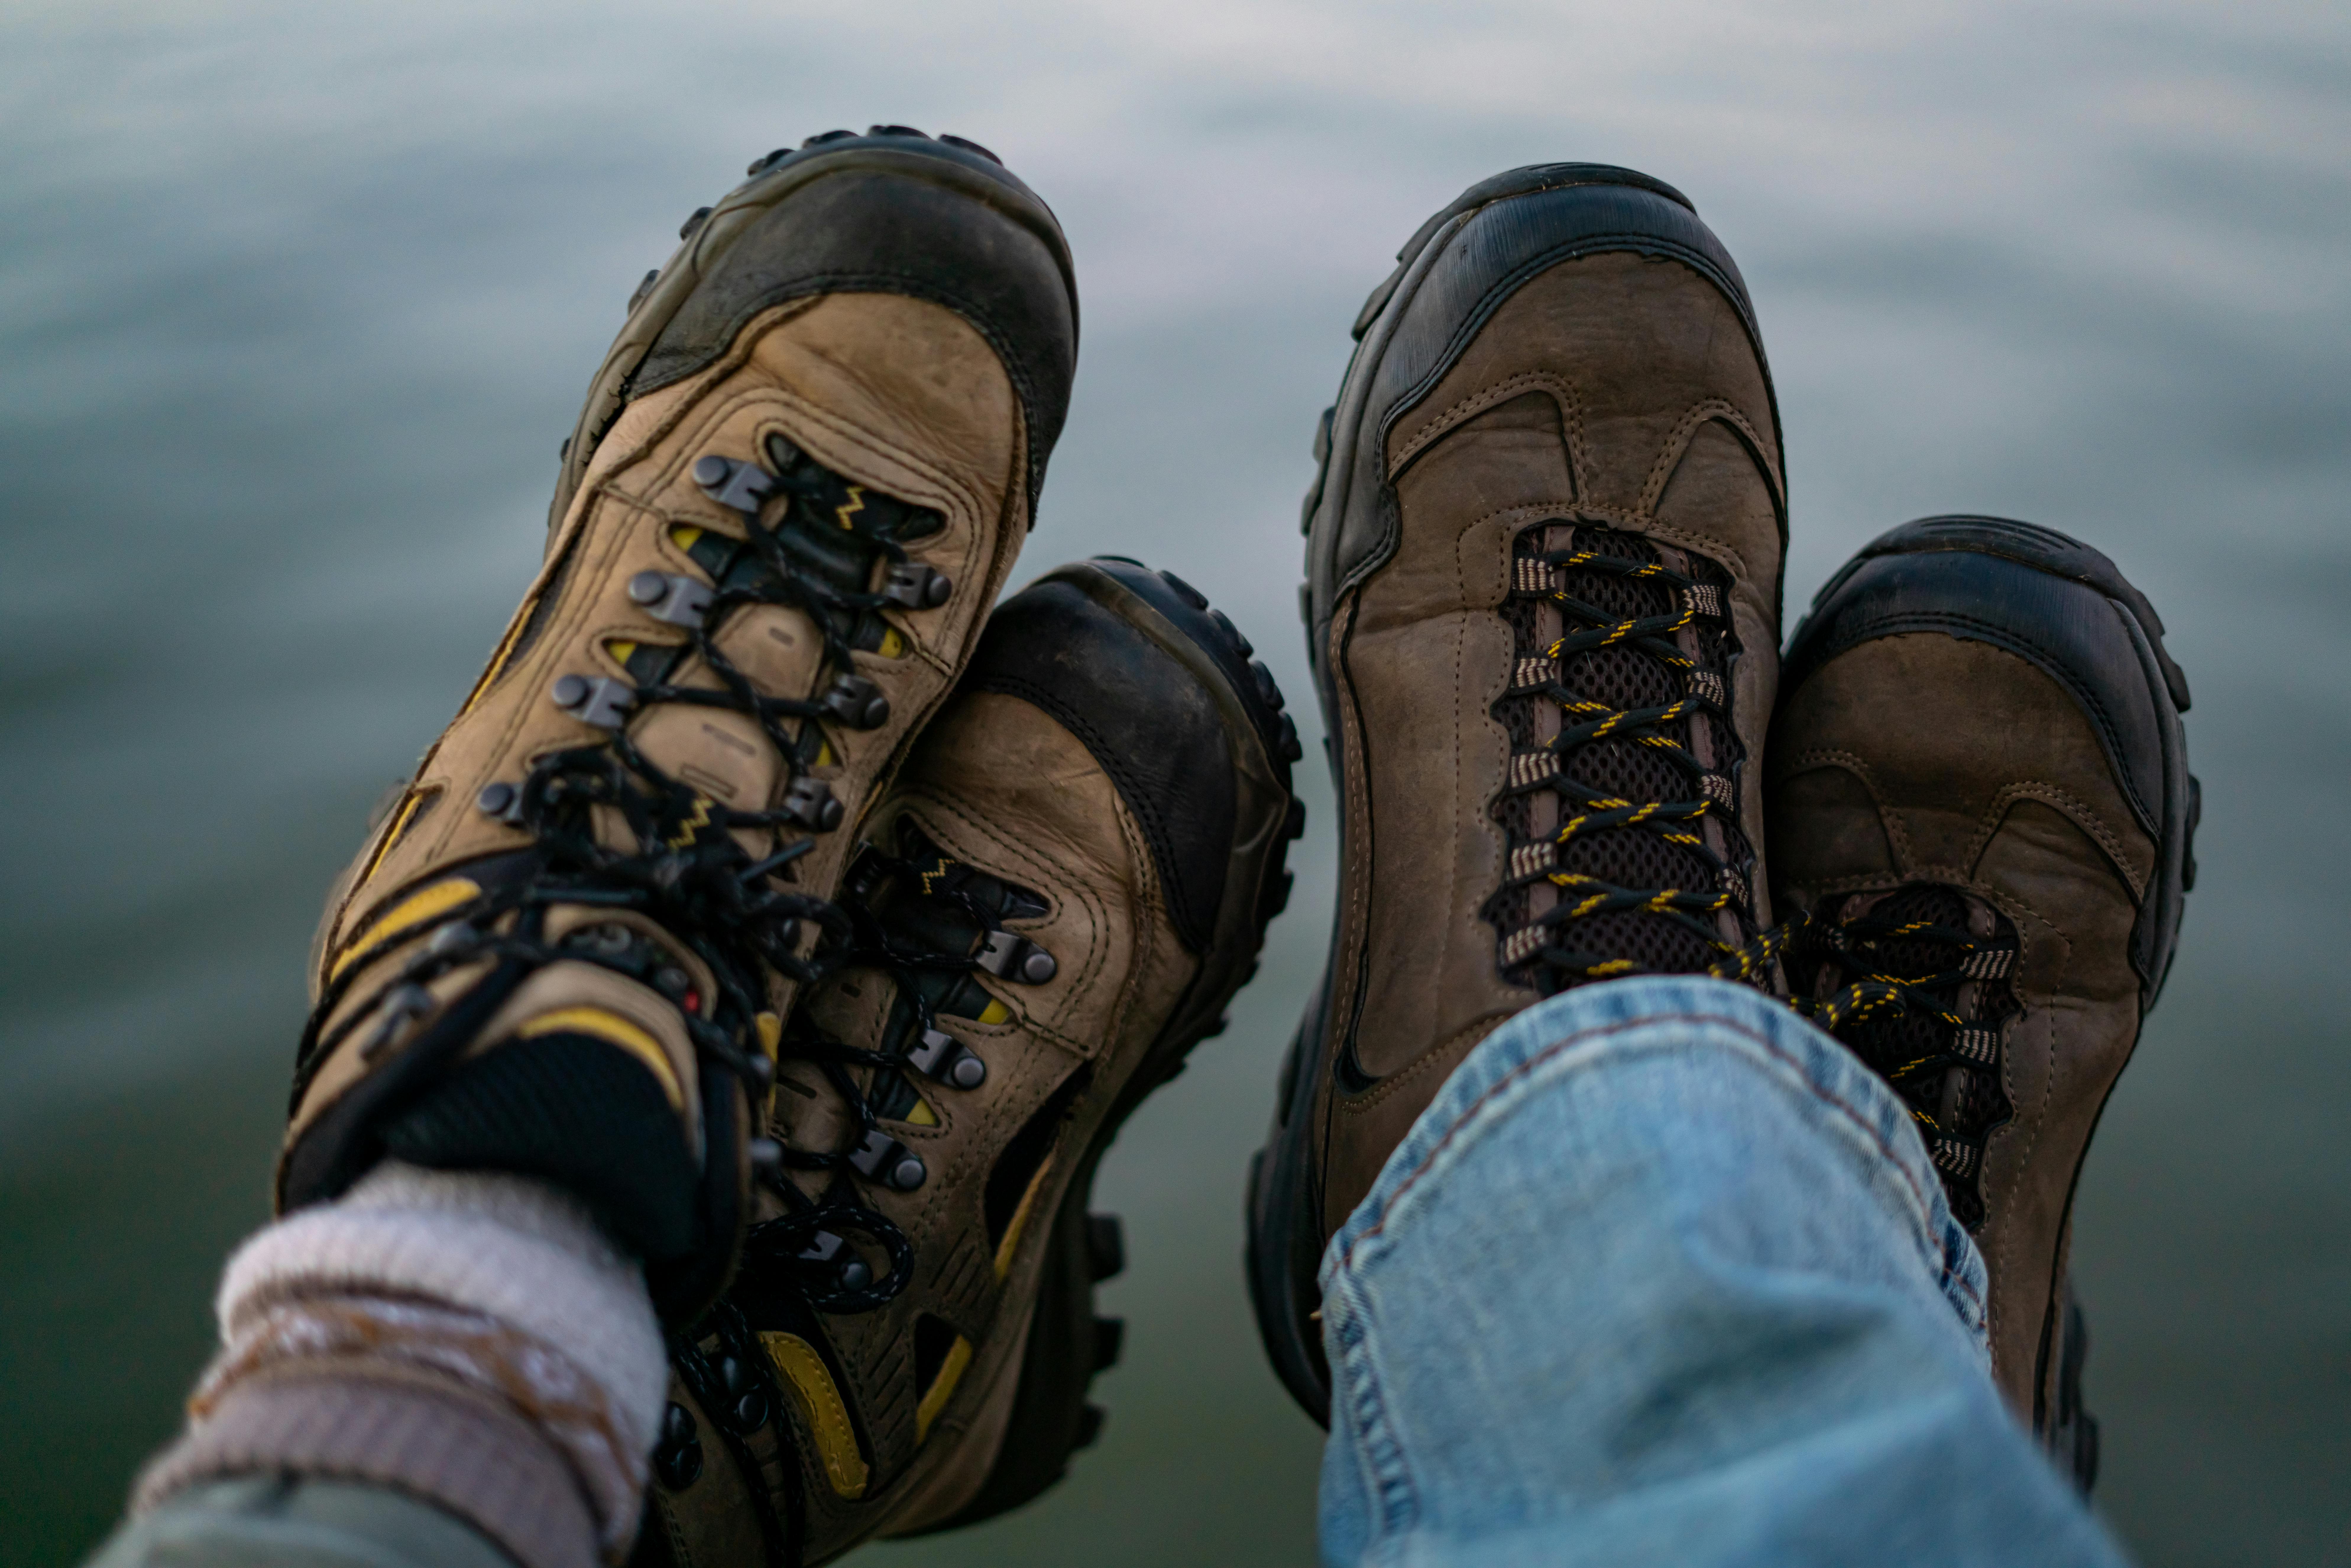 hiking shoes with jeans